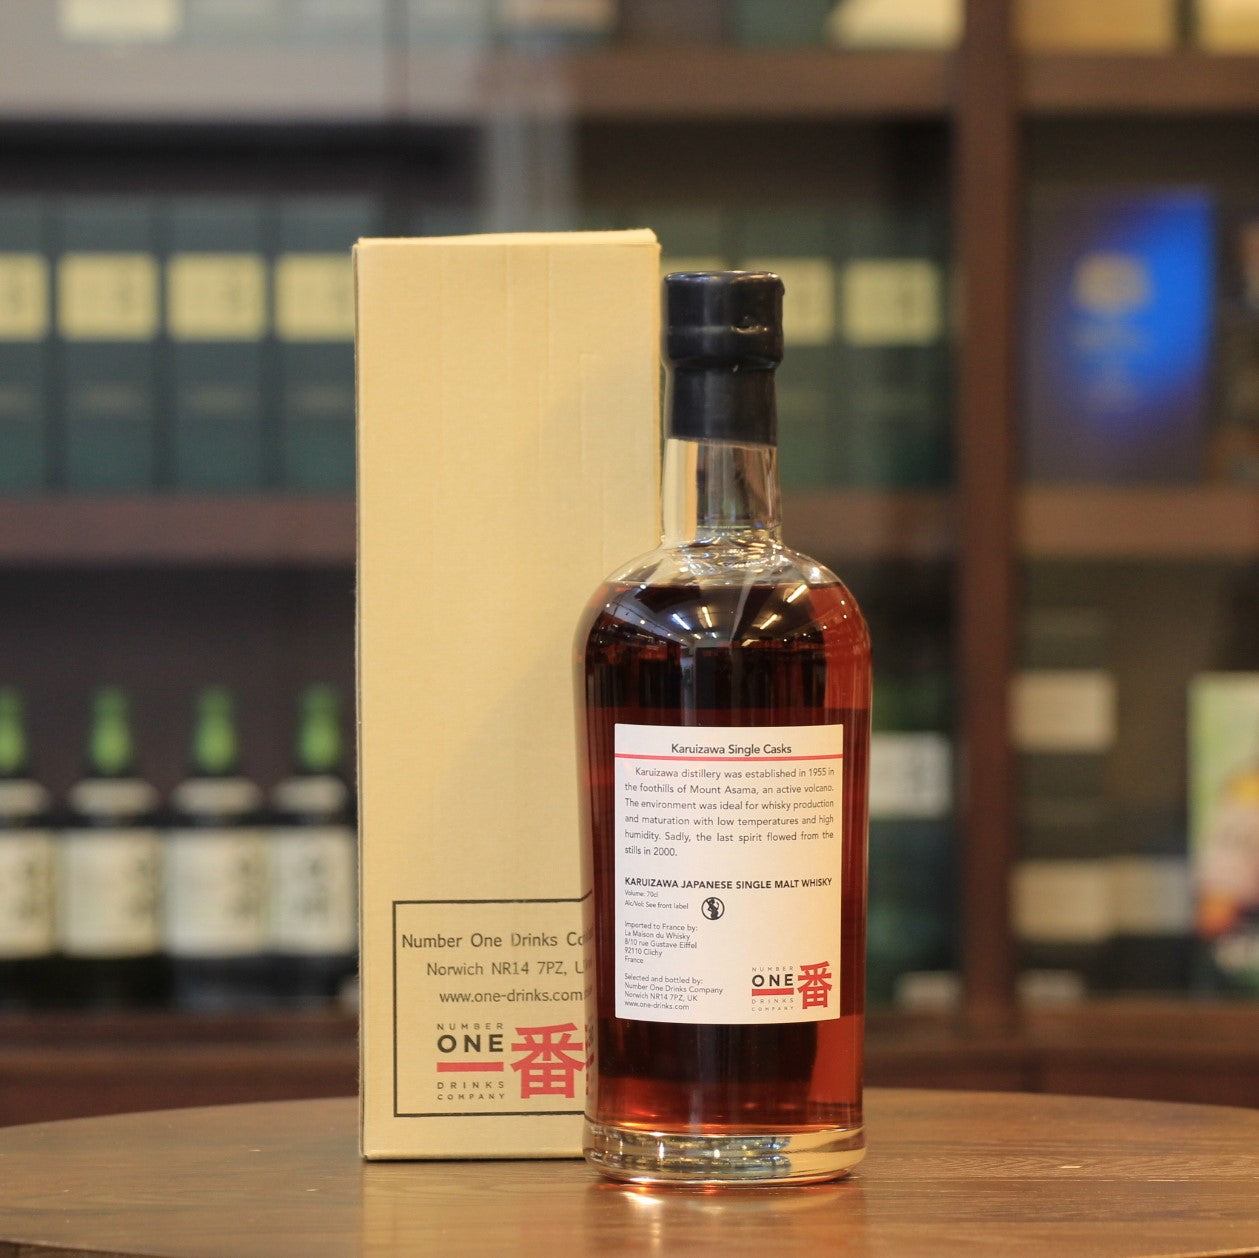 Region: Japan  Distillery: Karuizawa (Closed)  Age: 33 Years (March 1981 - April 2014)  ABV: 54.5% (Natural Cask Strength)  Size: 700 ml  A rare and vintage Karuizawa single malt Japanese whisky, distilled in 1981, matured in Ex-Sherry Cask #152 and bottled in 2014 Only 566 bottles were released. Rated 91+ on WhiskyBase across 65 votes.